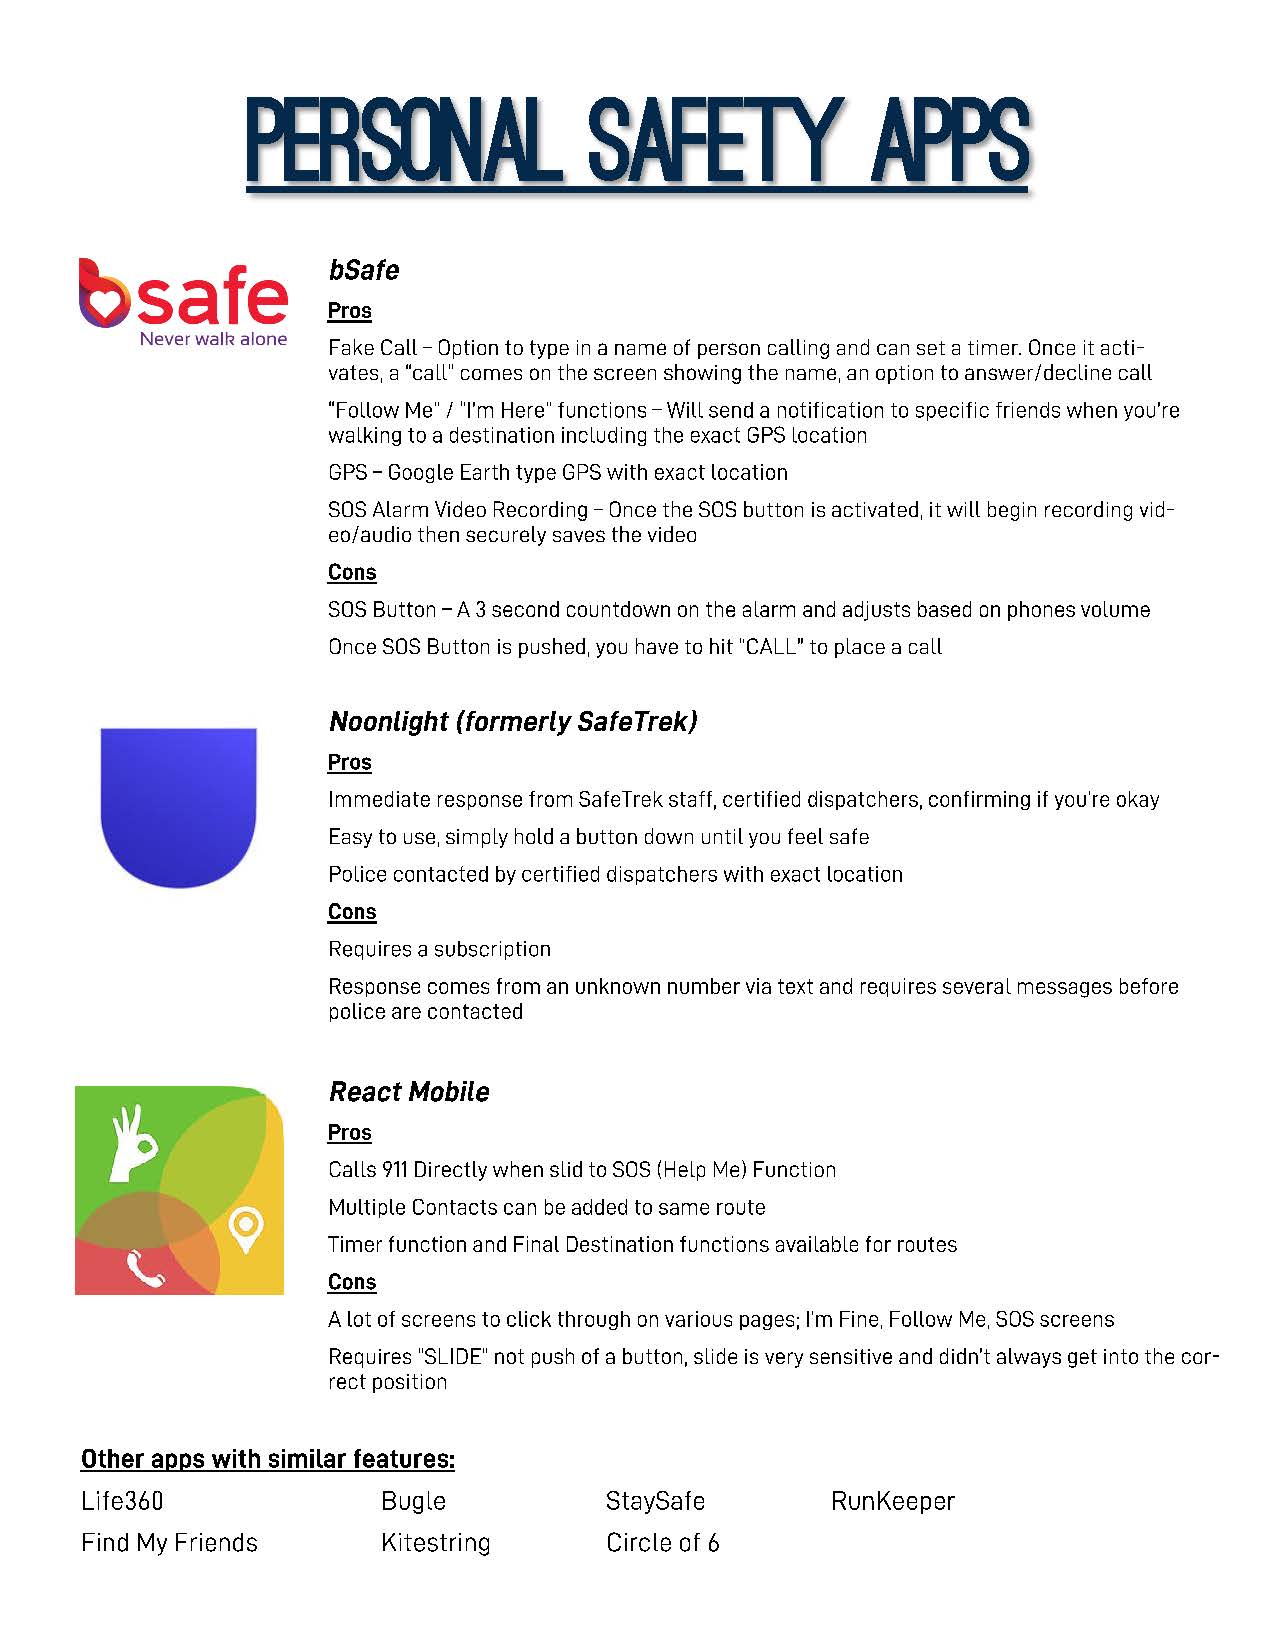 Personal safety apps